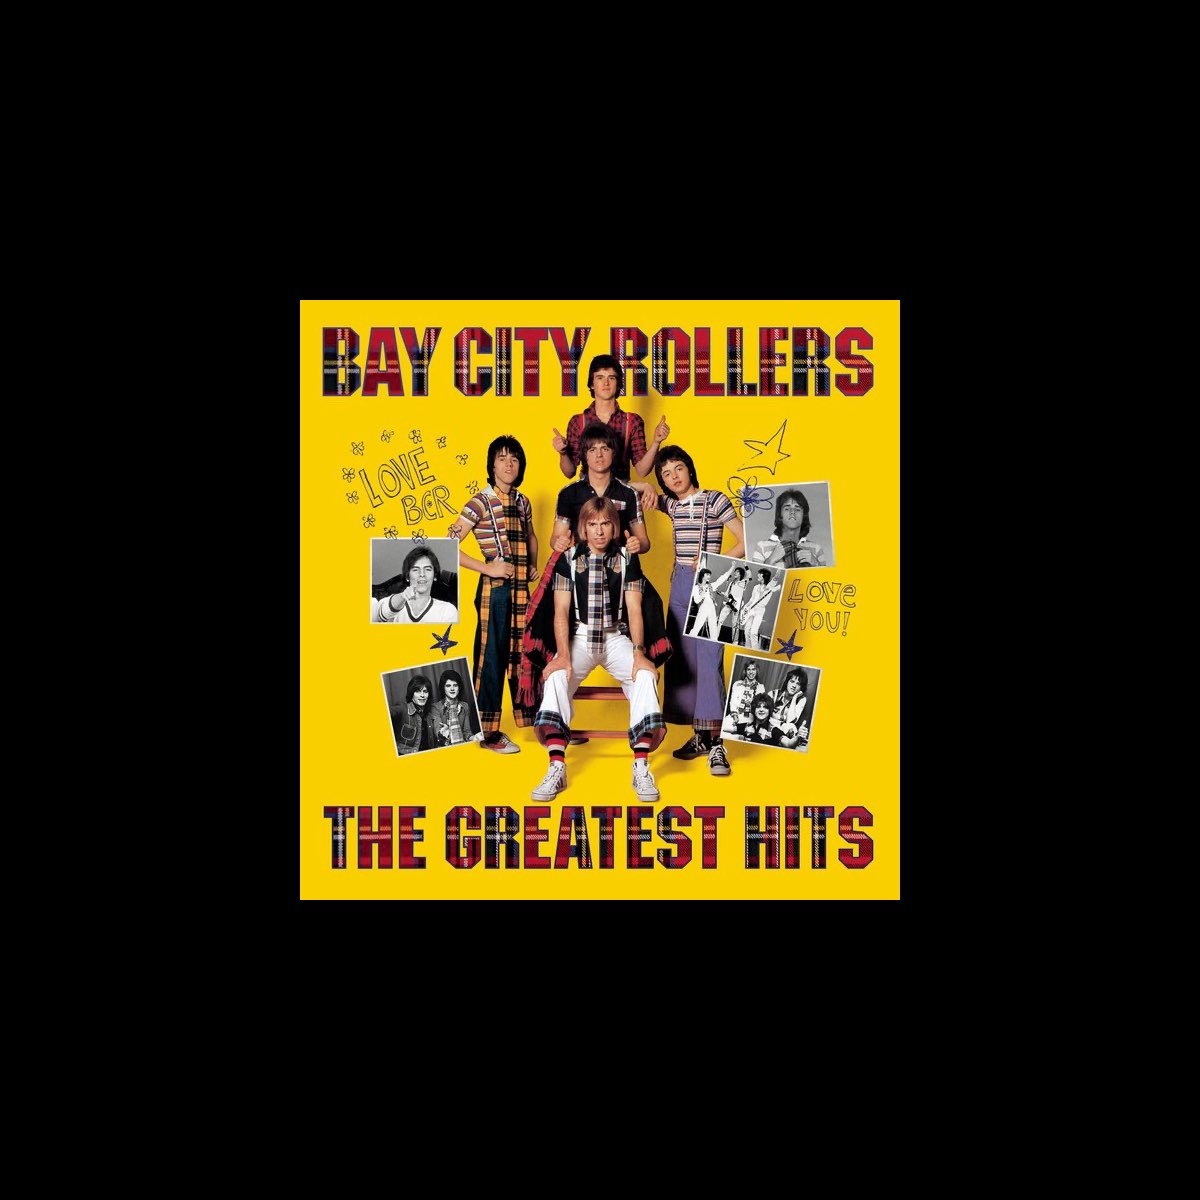 Bay City Rollers: The Greatest Hits by Bay City Rollers on Apple Music